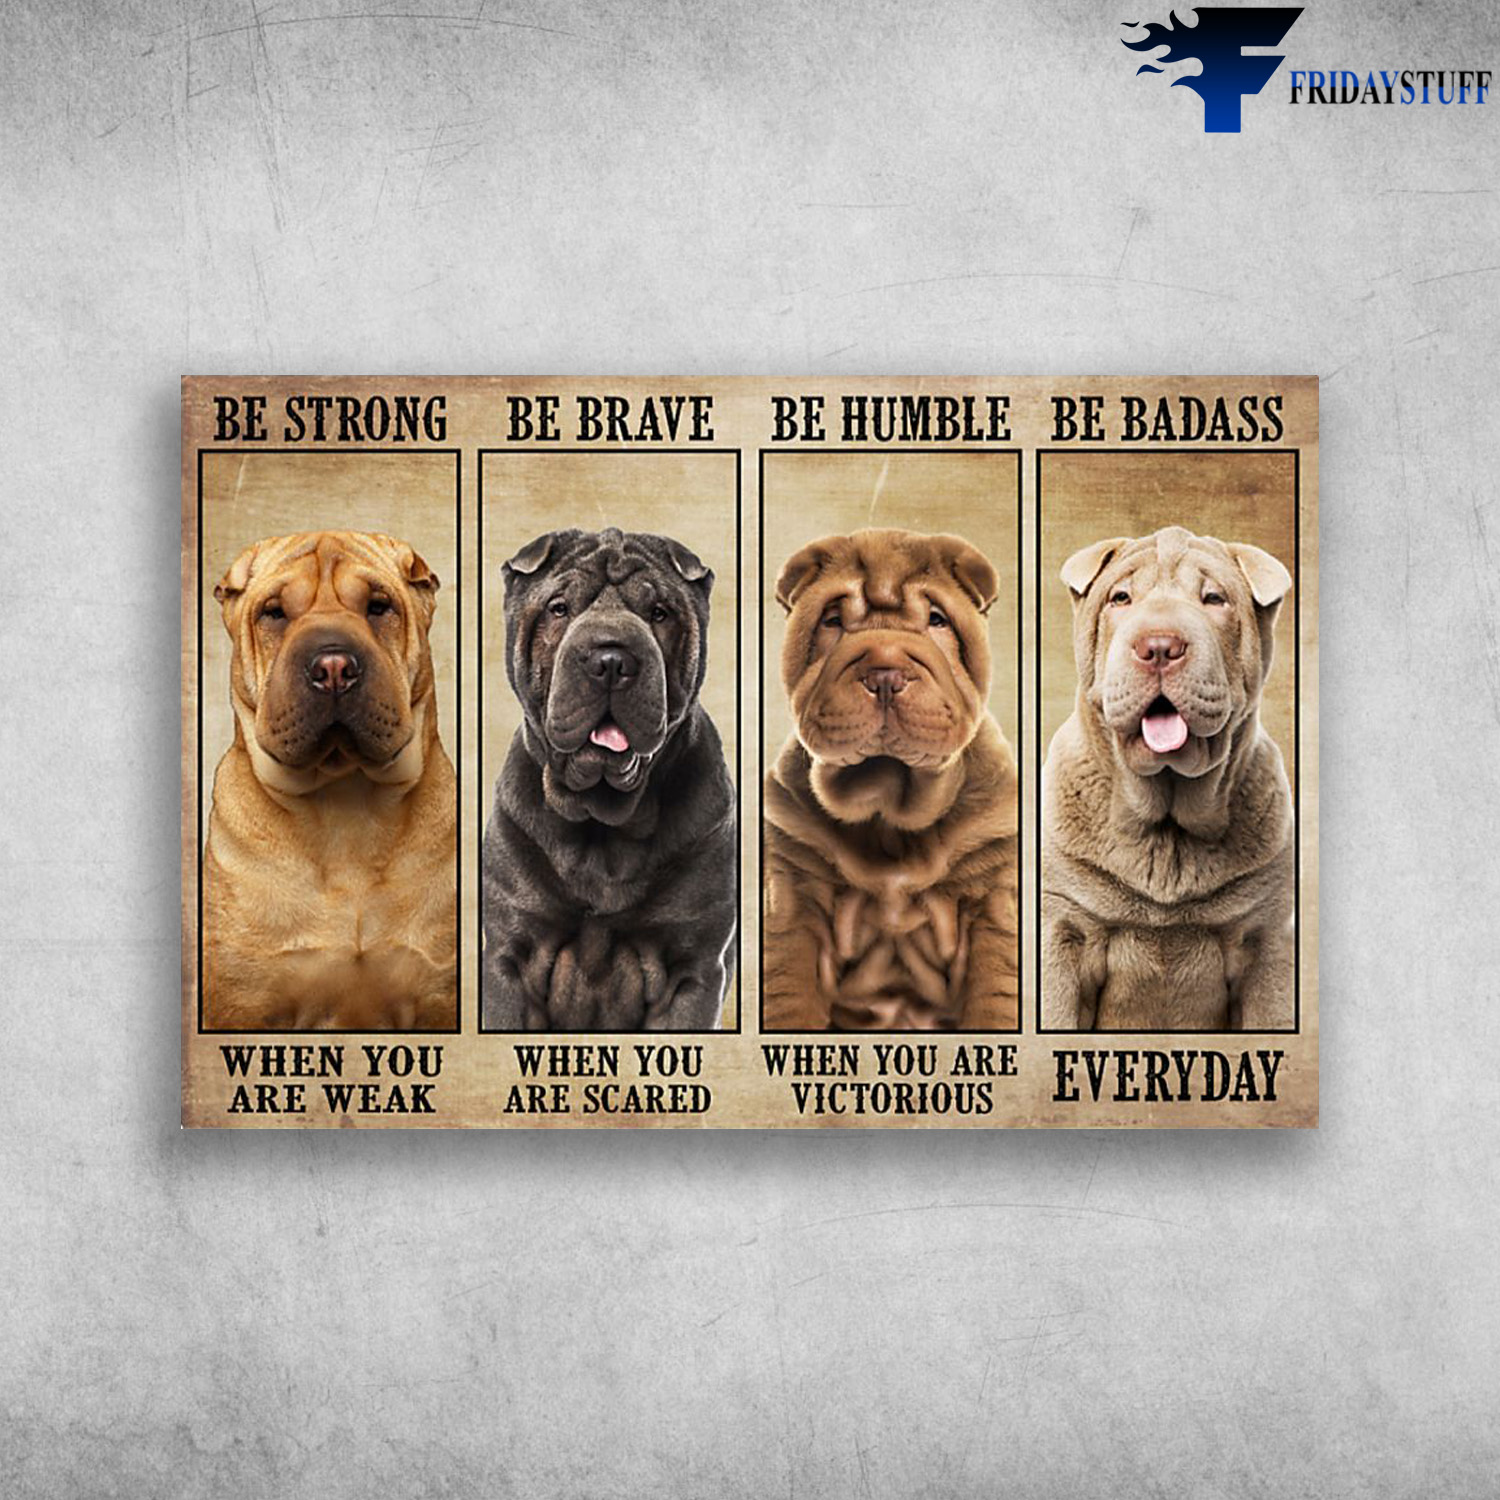 Shar Pei - Be Strong When You Are Weak, Be Brave When You Are Scared, Be Humble When You Are Victorious, Be Badass Everyday